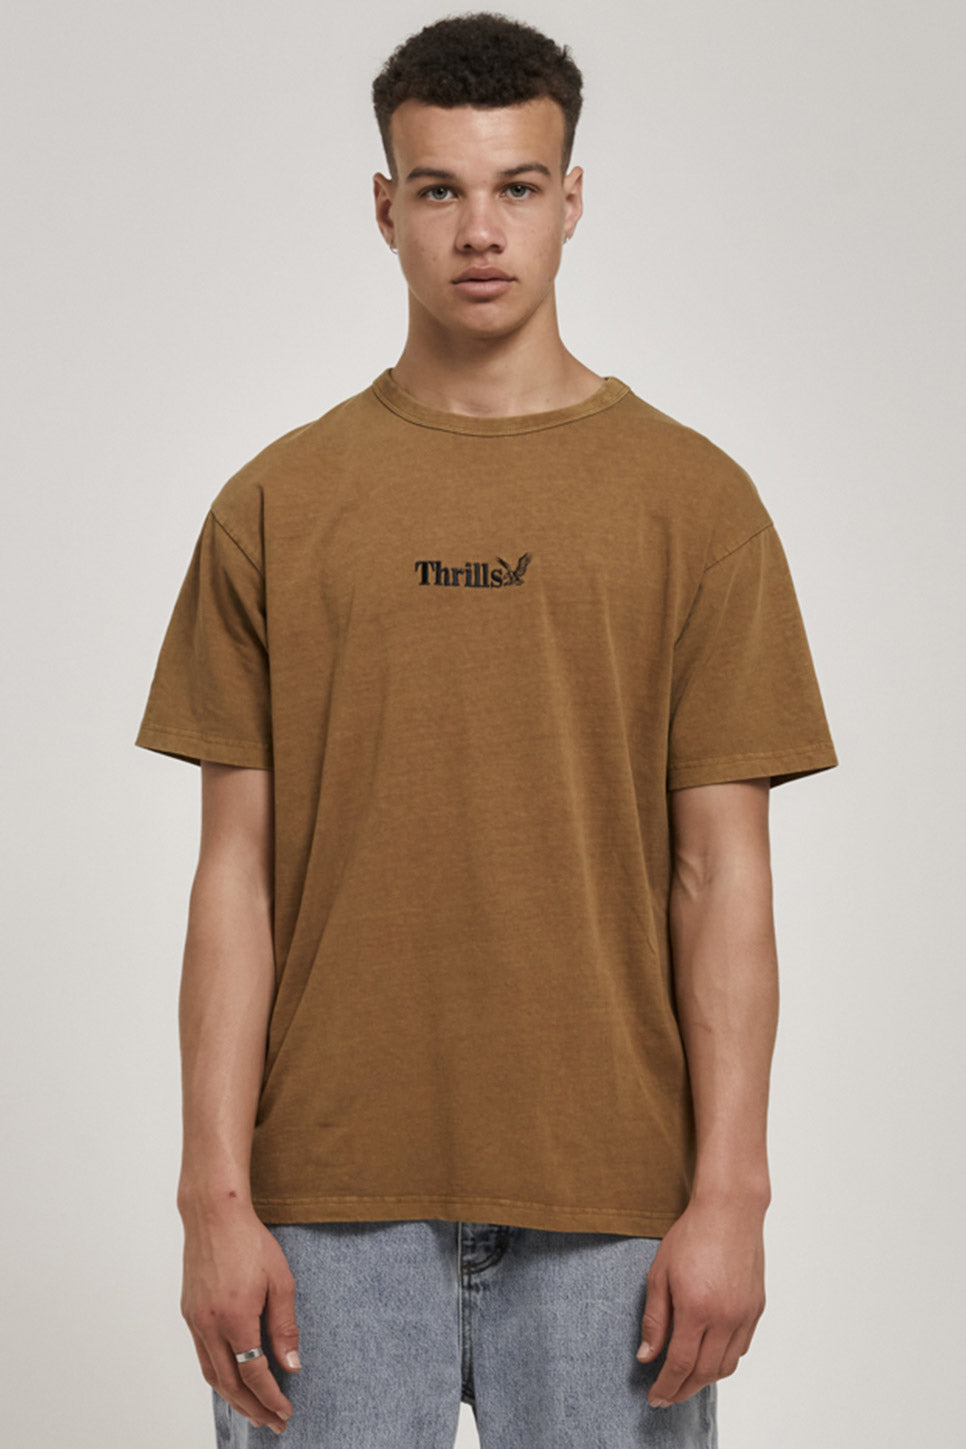 Thrills - Workwear Embro Box Fit Tee - Tobacco - Front